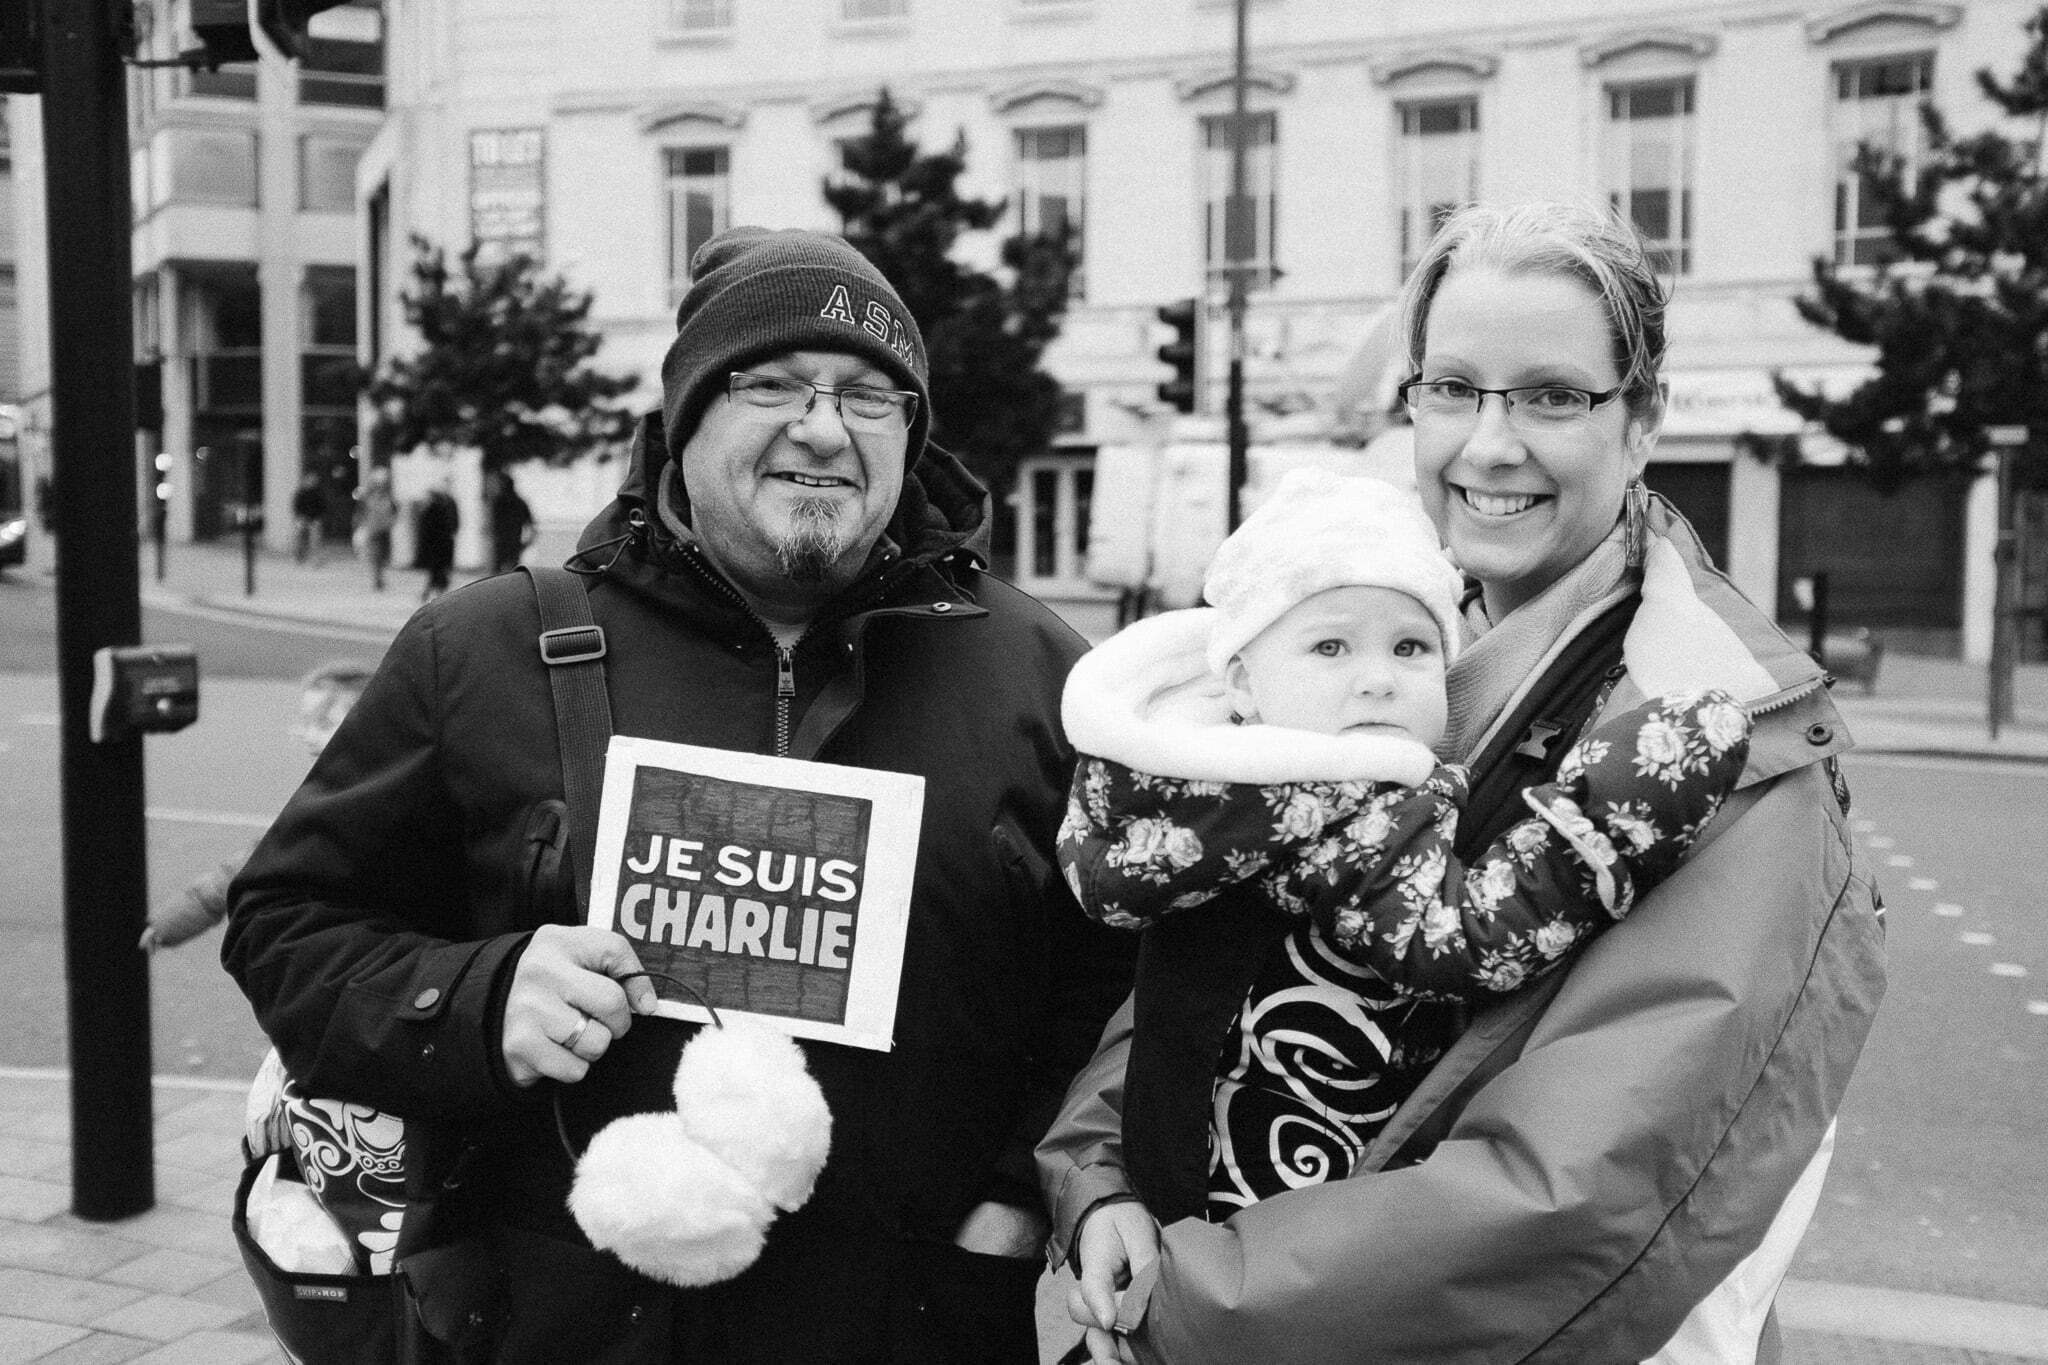 Je suis Charlie rally in Liverpool